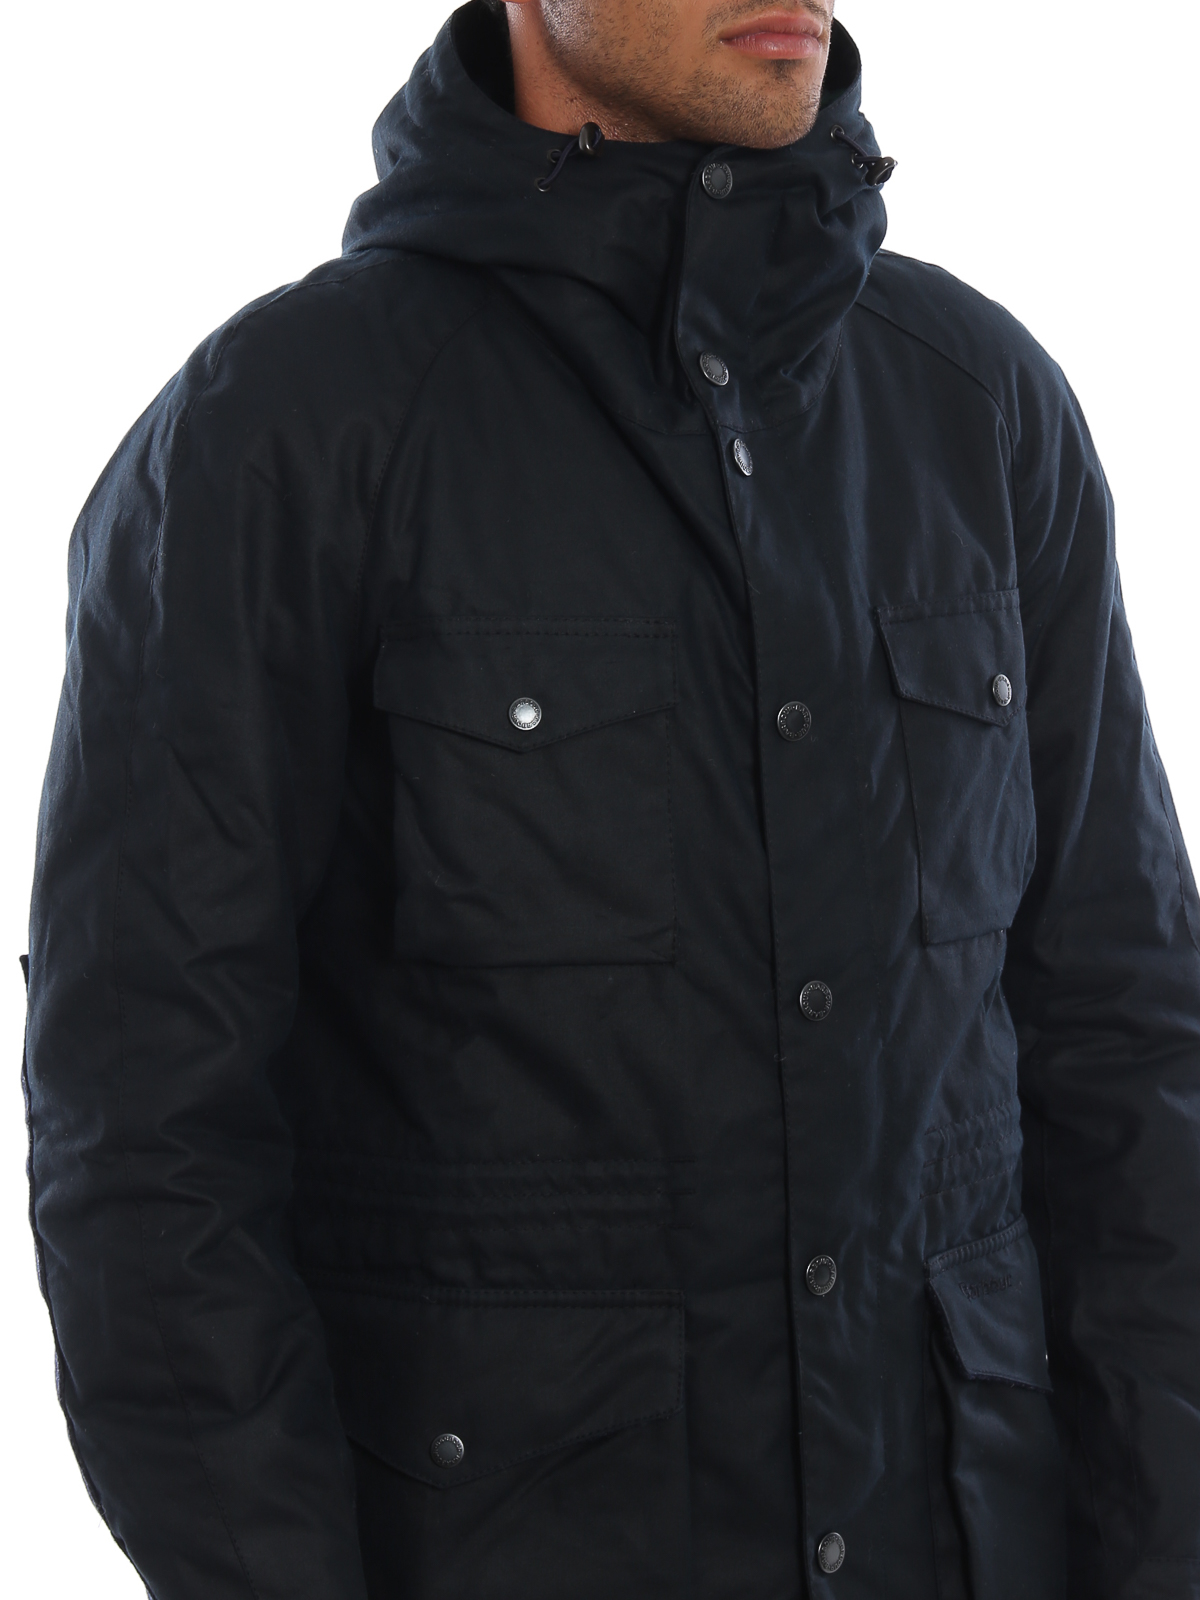 barbour coll wax jacket mens